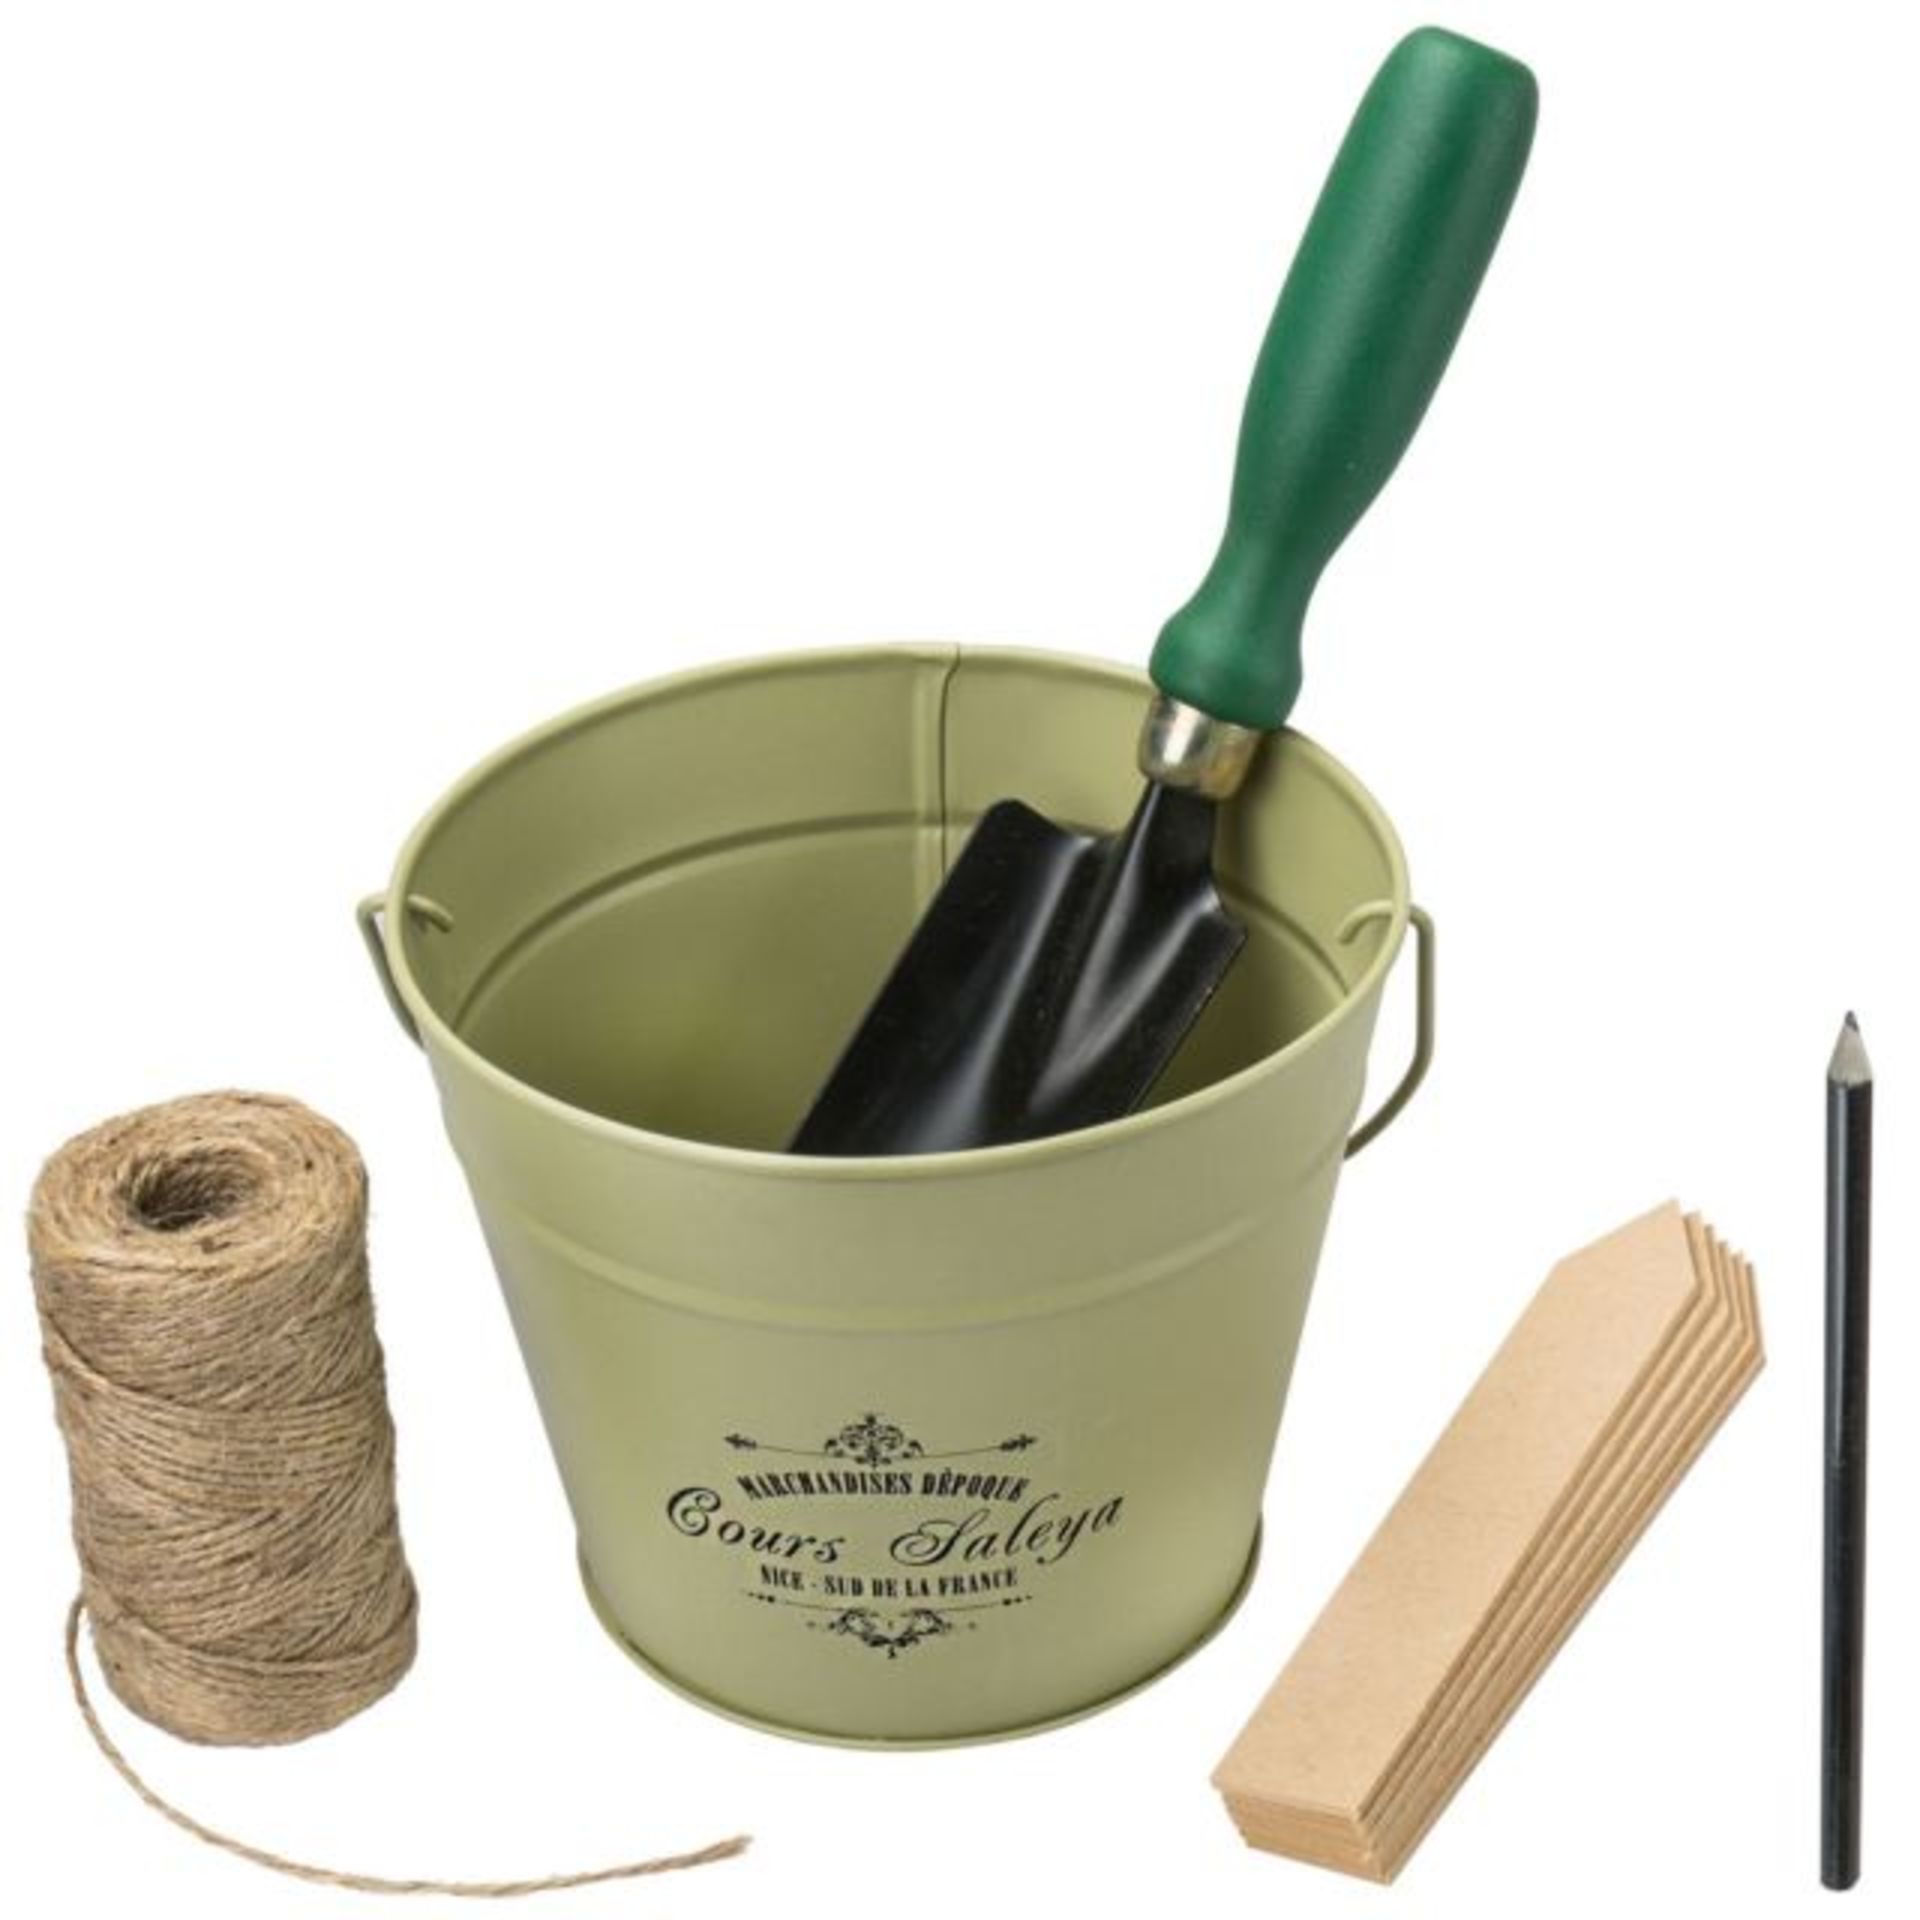 V *TRADE QTY* Brand New Garden Planter Set Includes Metal Plant Pot - Twine - Pencil - 6 Wooden - Image 2 of 2